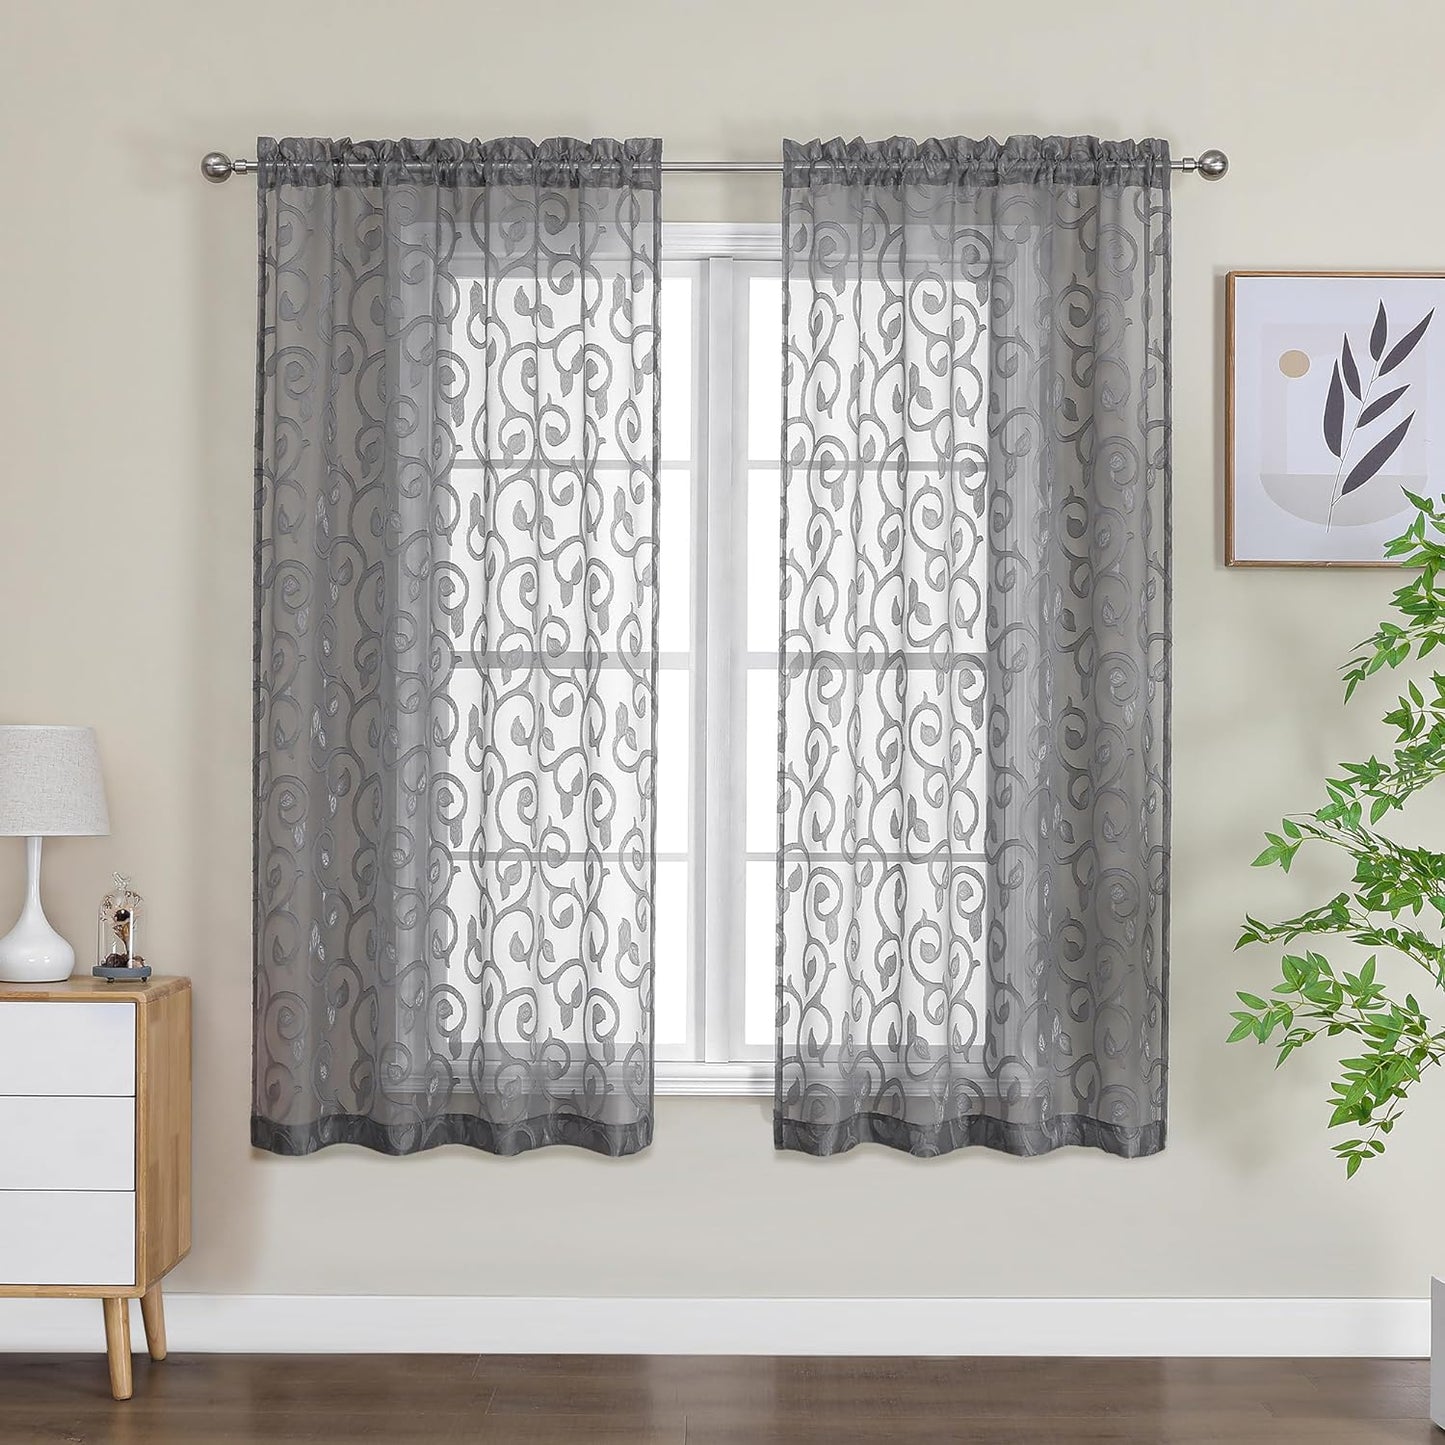 OWENIE Furman Sheer Curtains 84 Inches Long for Bedroom Living Room 2 Panels Set, Light Filtering Window Curtains, Semi Transparent Voile Top Dual Rod Pocket, Grey, 40Wx84L Inch, Total 84 Inches Width  OWENIE Charcoal Gray 40W X 63L 